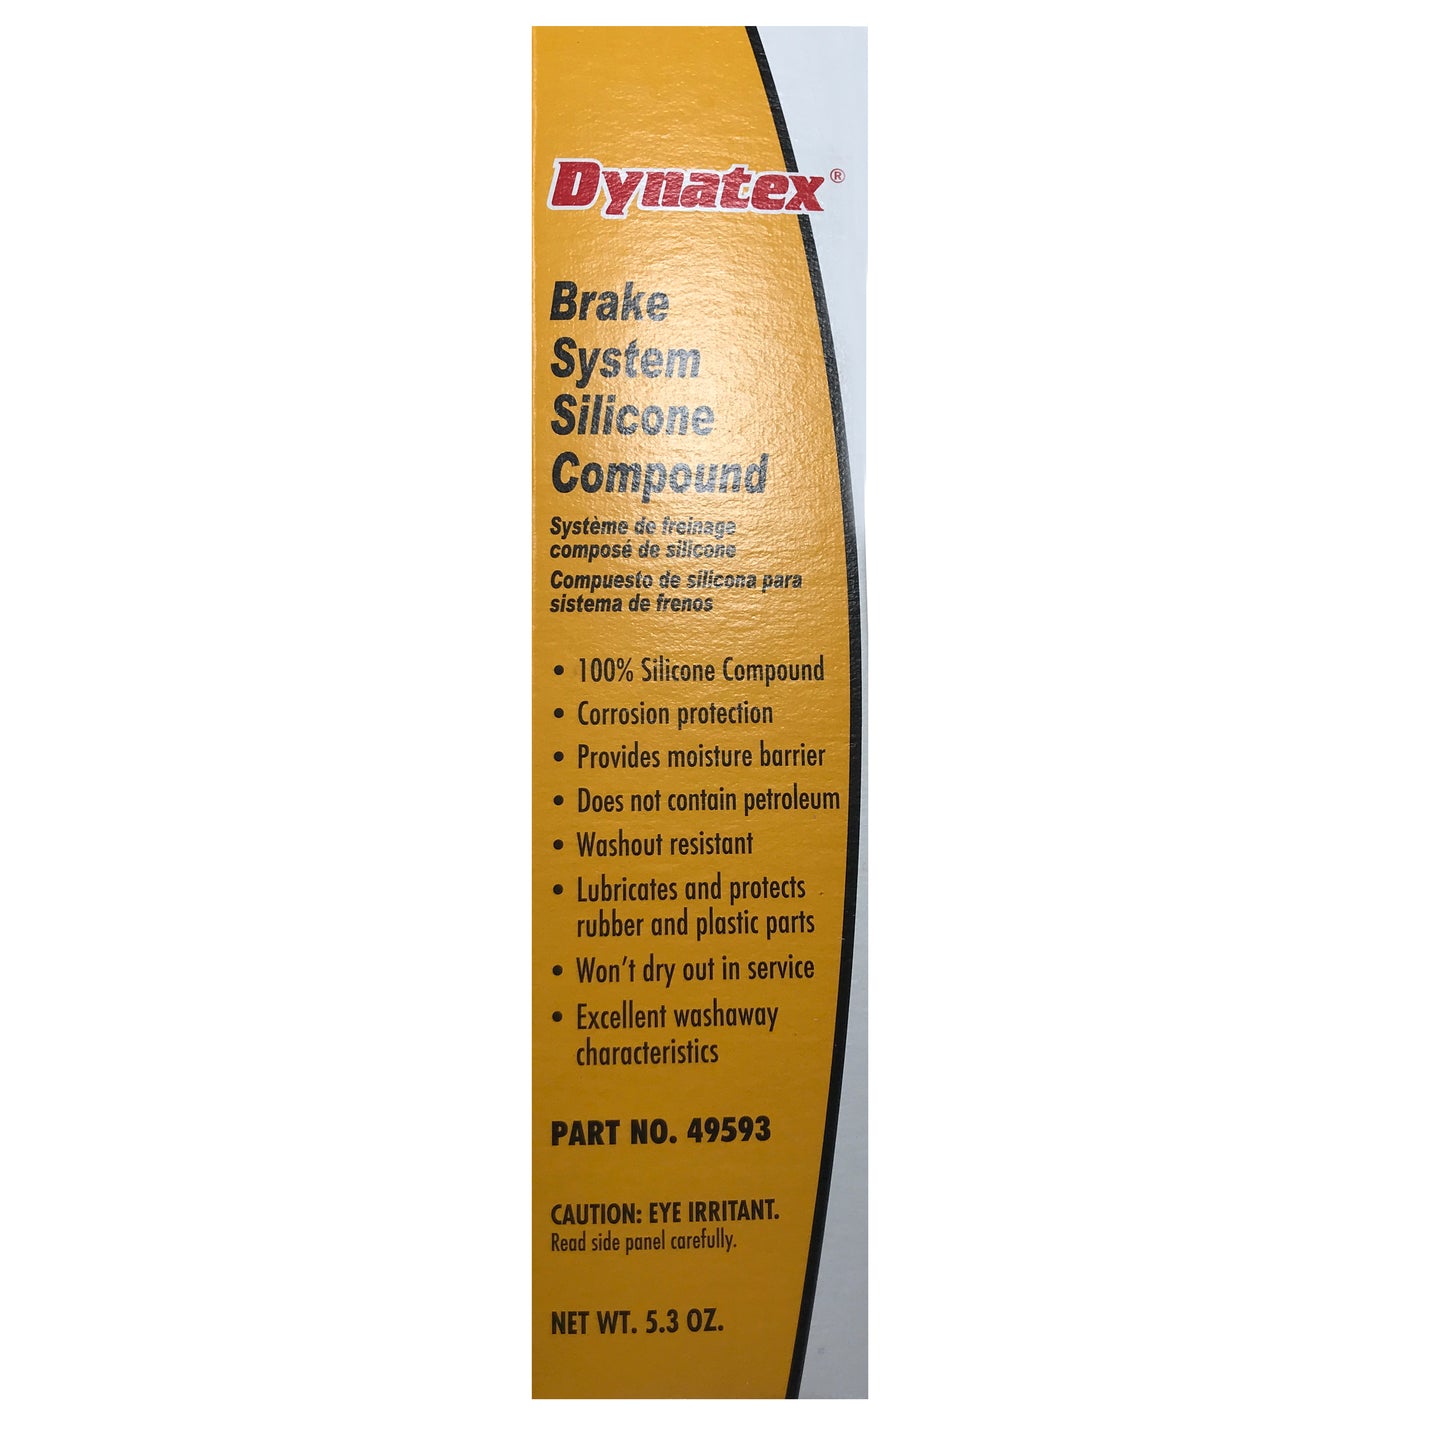 Dynatex Brake System Silicone Lubricant Compound 5.3 Oz. Tube - Boxed, case of 12